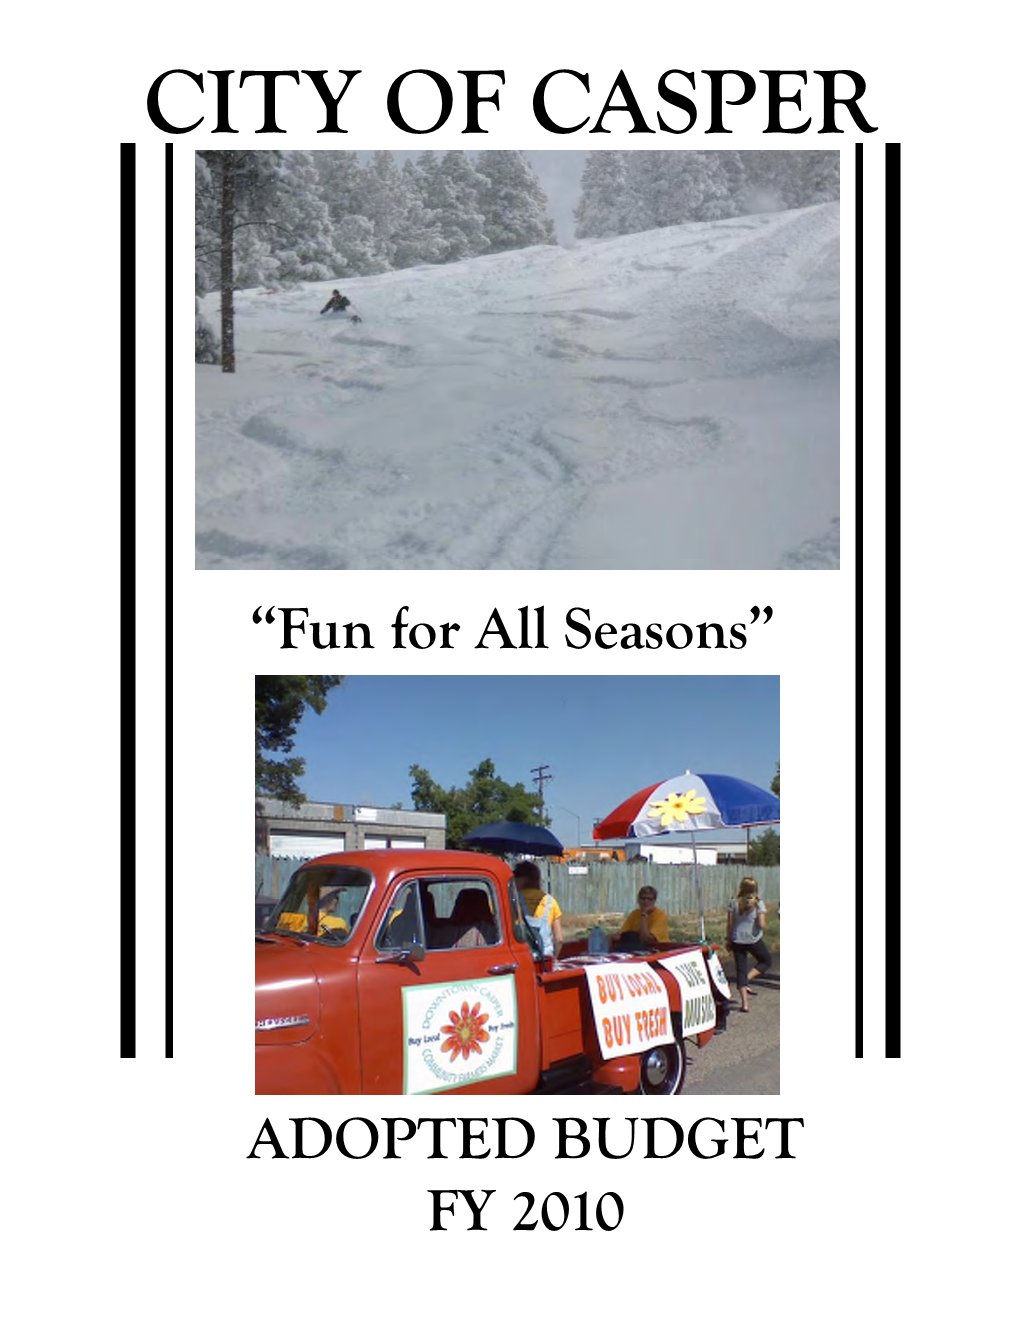 ADOPTED BUDGET FY 2010 “Fun for All Seasons”